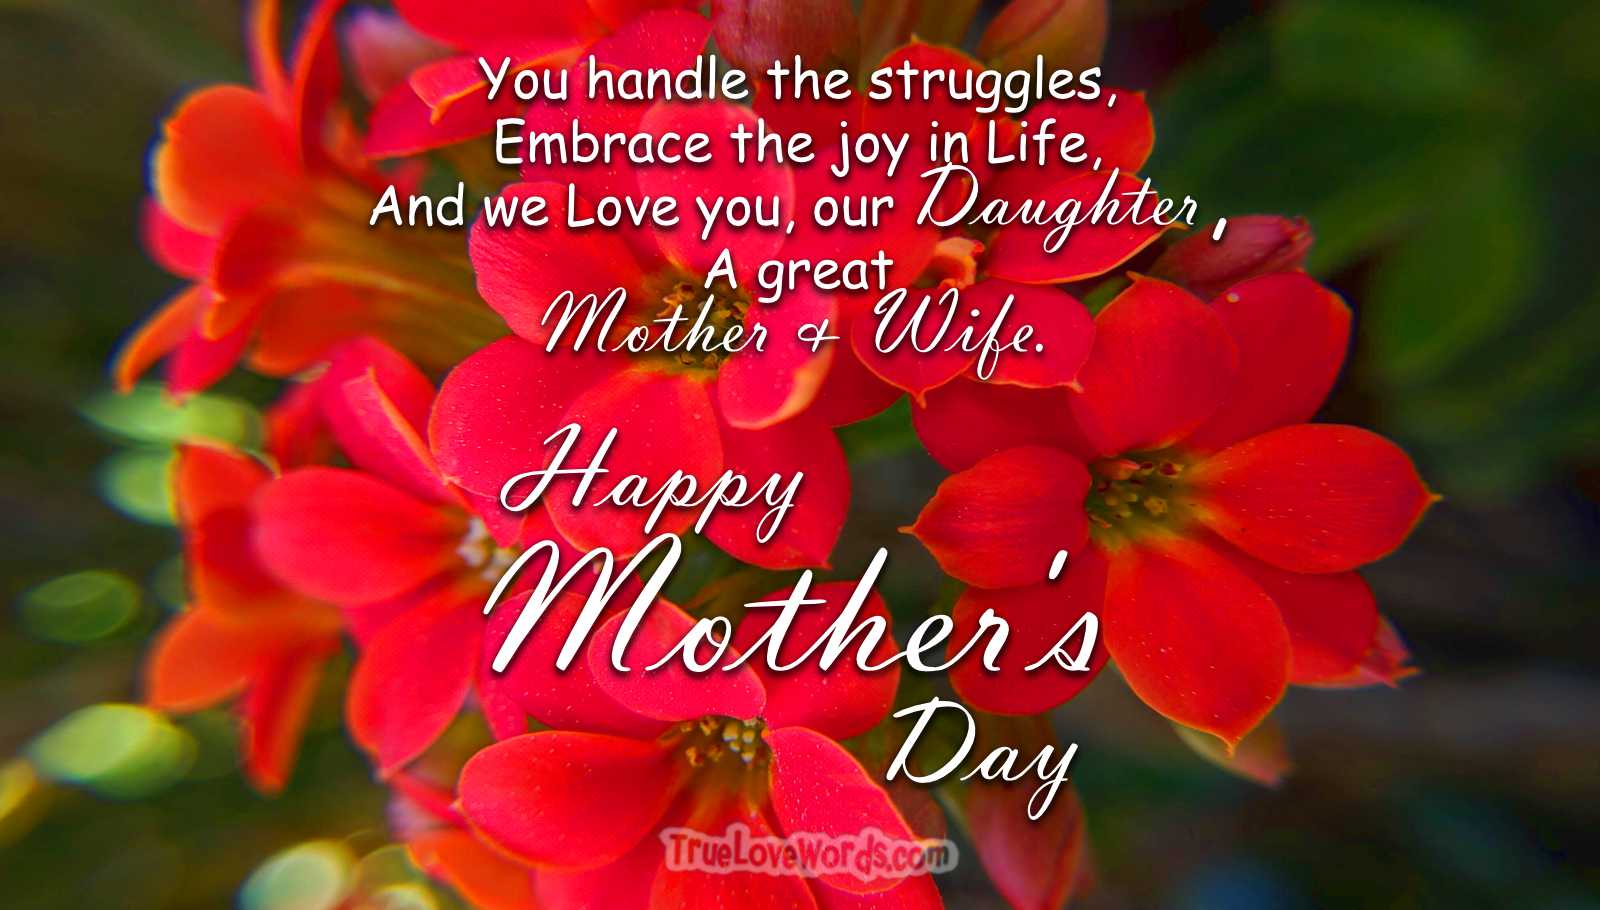 Sincere Mother's Day Wishes For Daughter » True Love Words